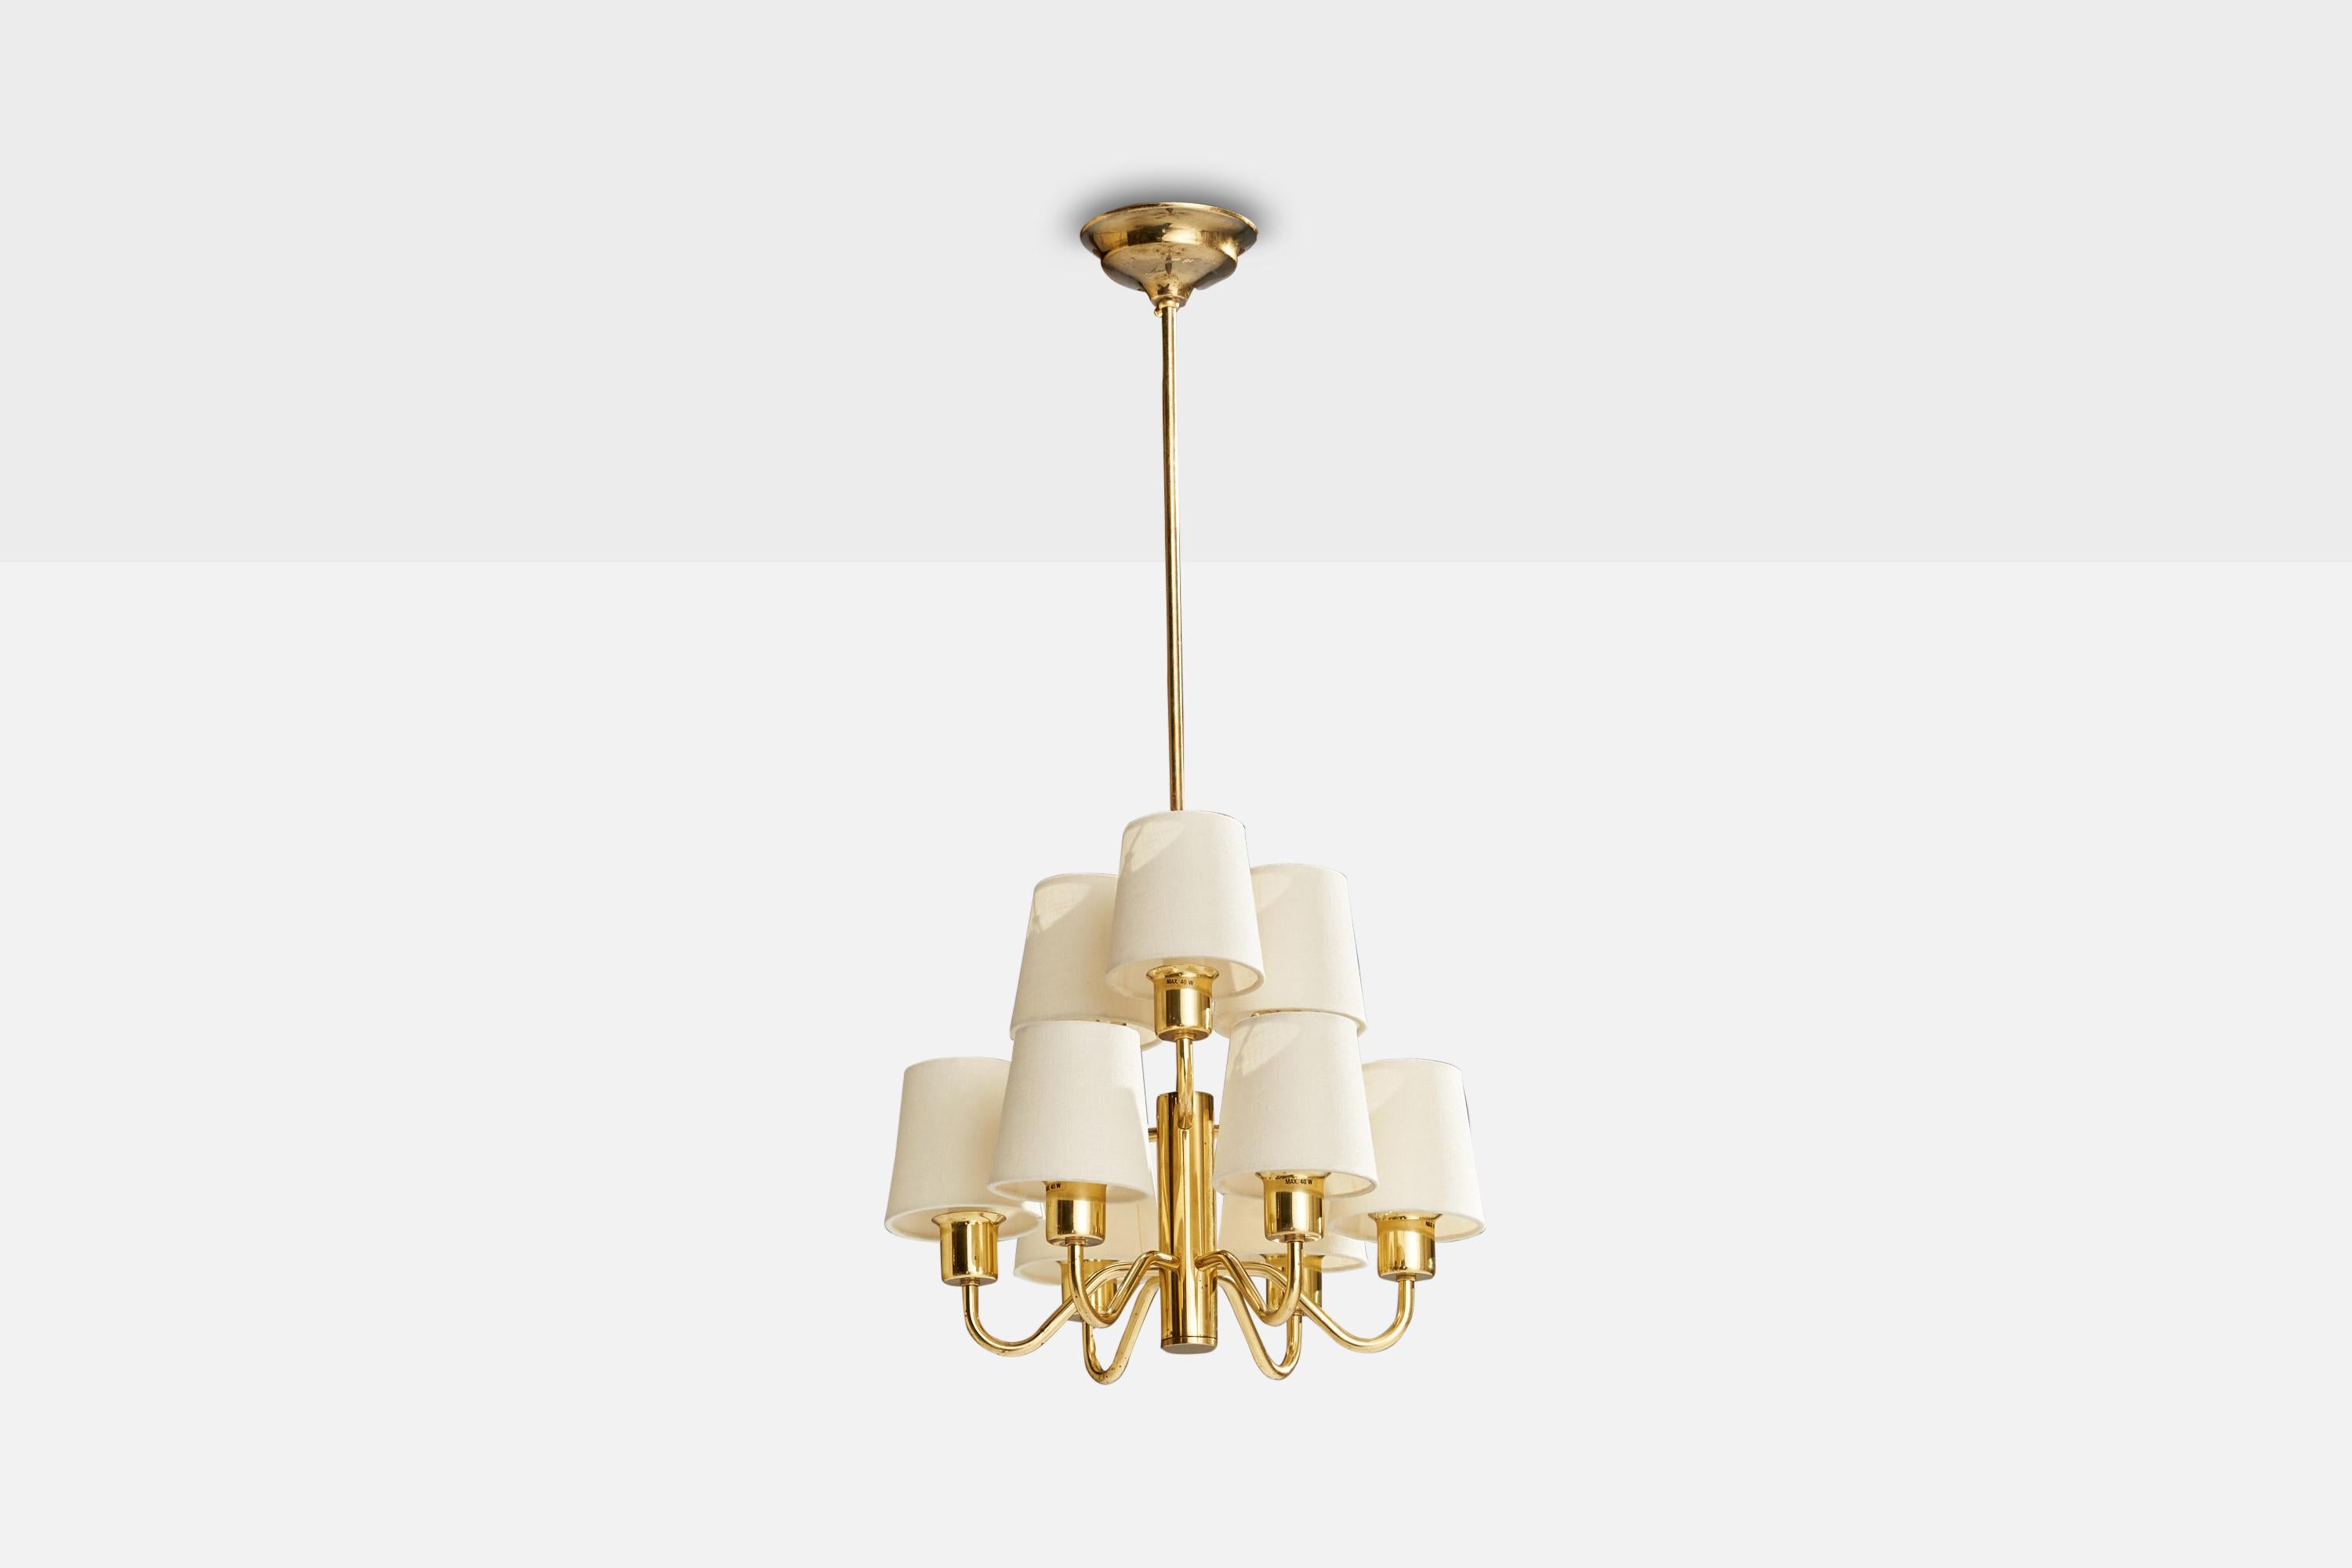 A brass and off-white fabric chandelier designed and produced by Hans-Agne Jakobsson, Sweden, c. 1960s.

Dimensions of canopy (inches): 2” H x 4.75” Diameter
Socket takes standard E-14 bulbs. 9 sockets.There is no maximum wattage stated on the